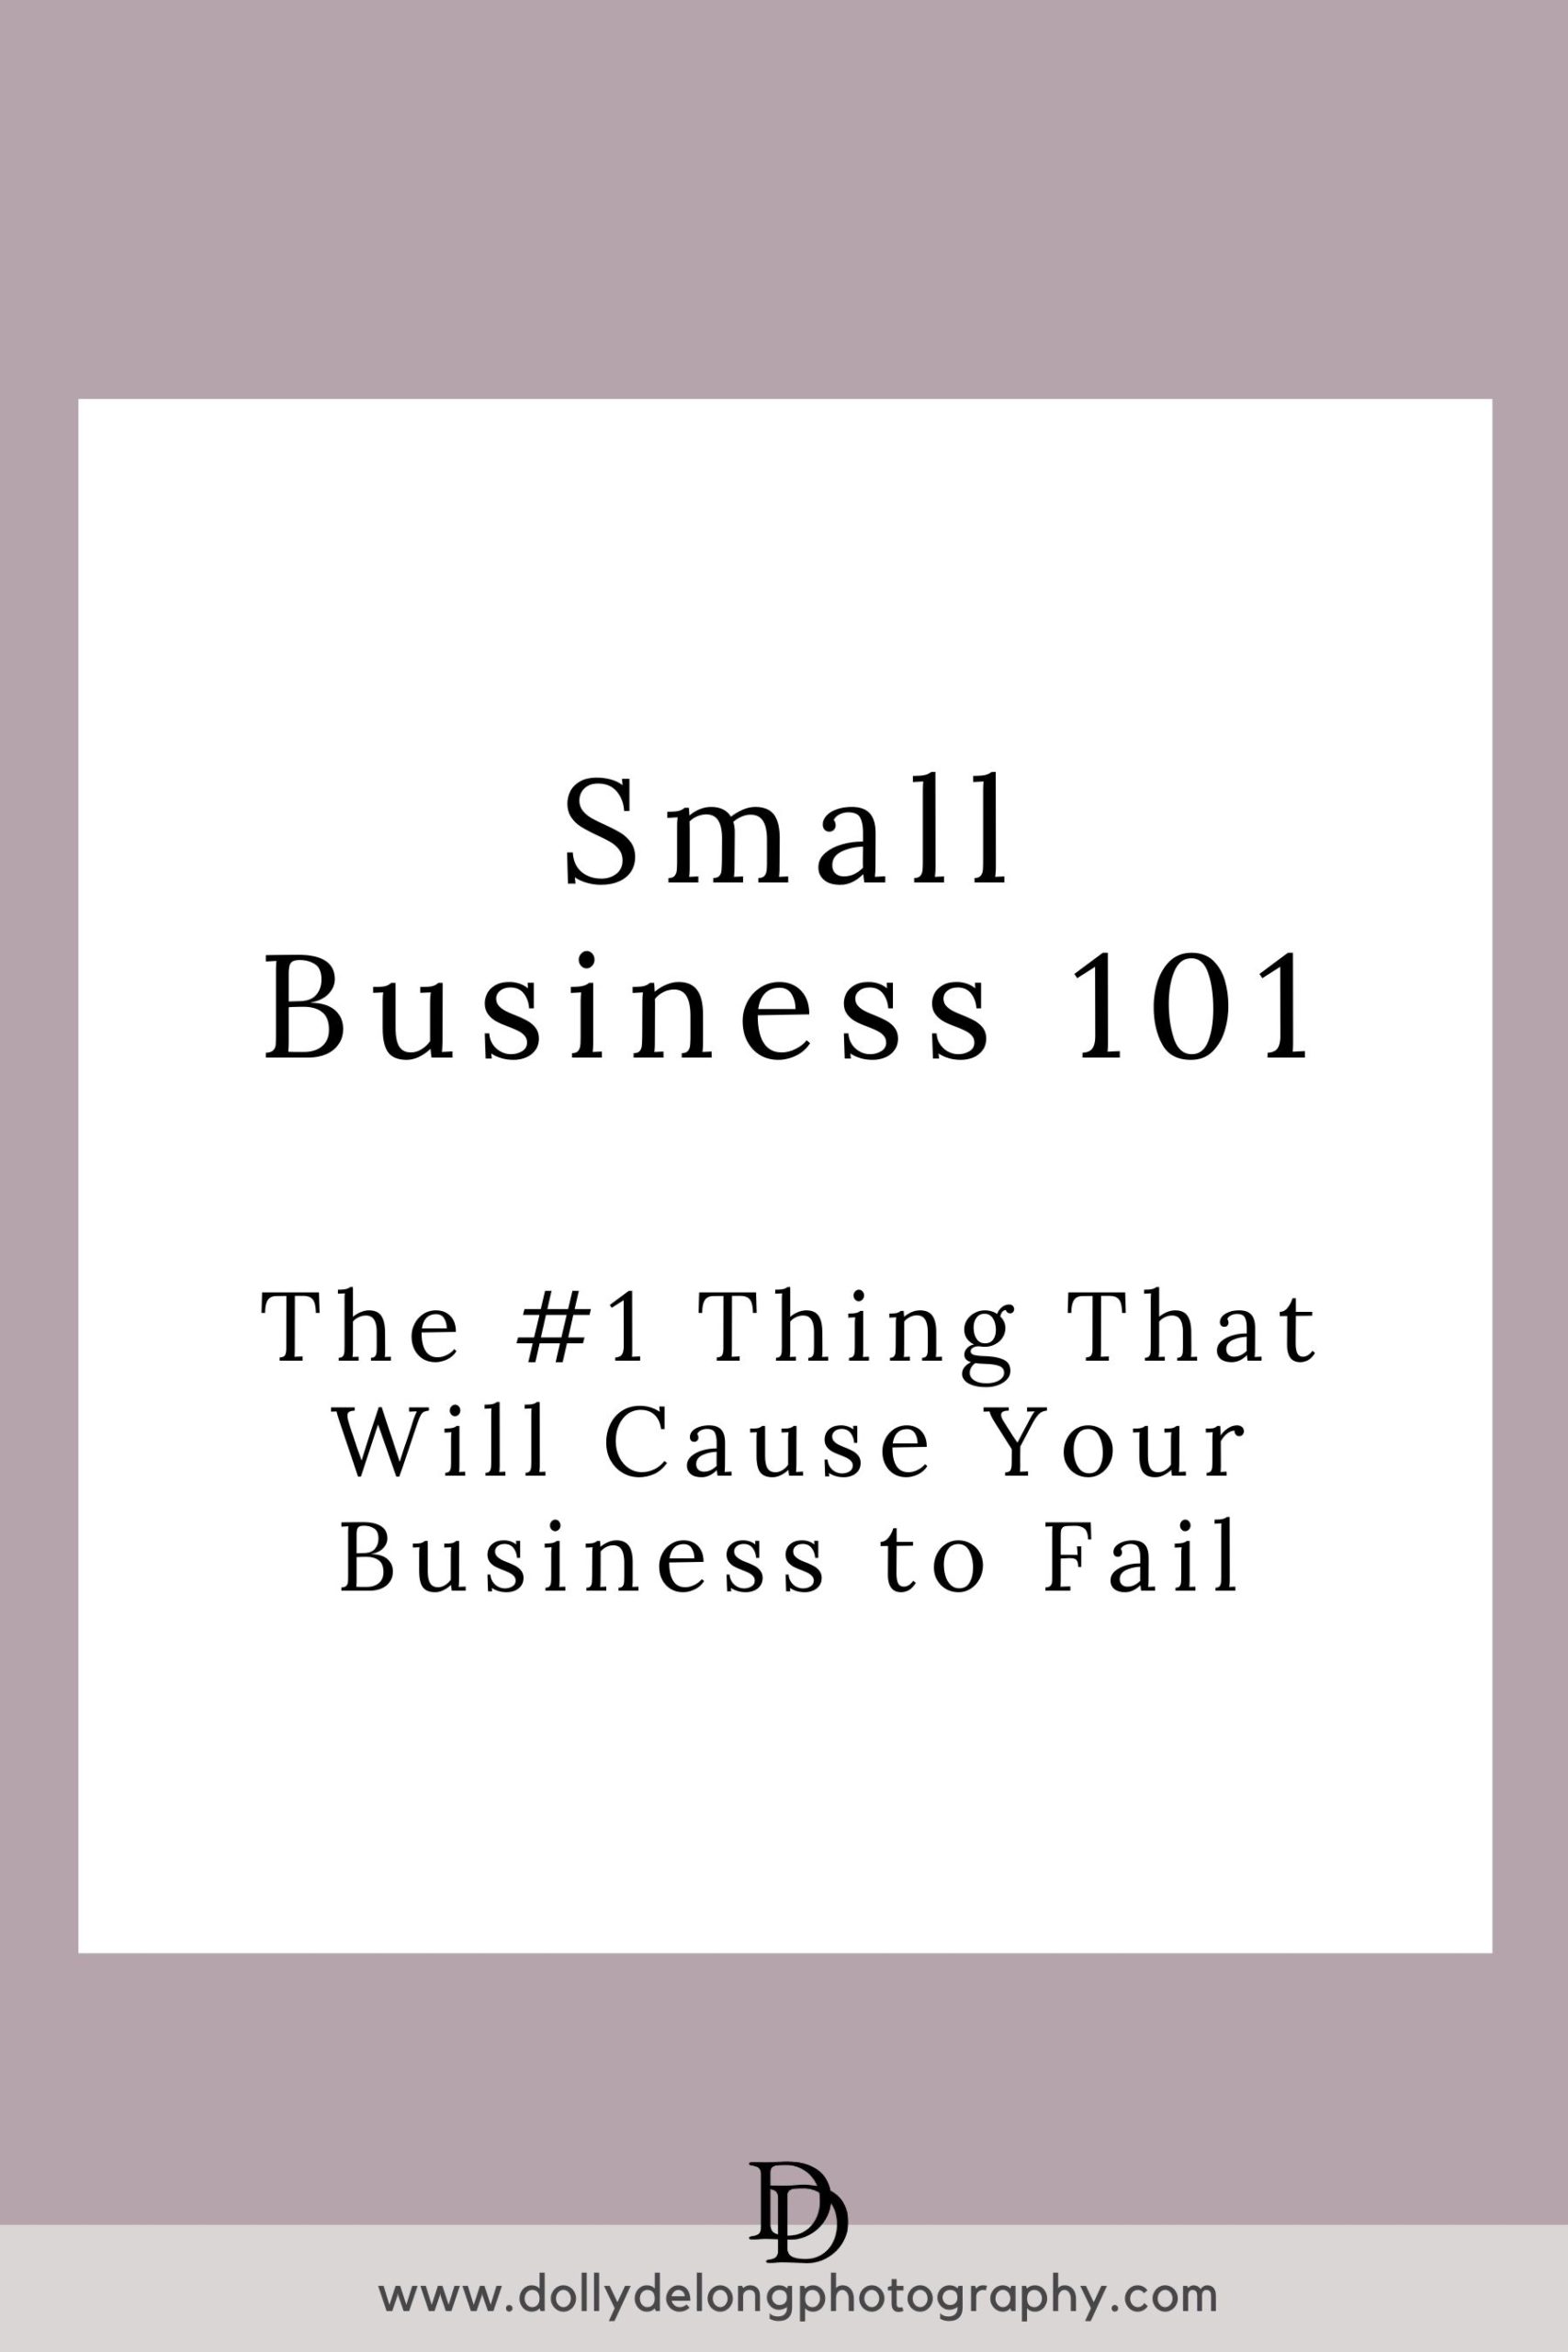 The #1 Thing That Will Cause Your Business to Fail by Nashville Branding Photographer Dolly DeLong Photography5